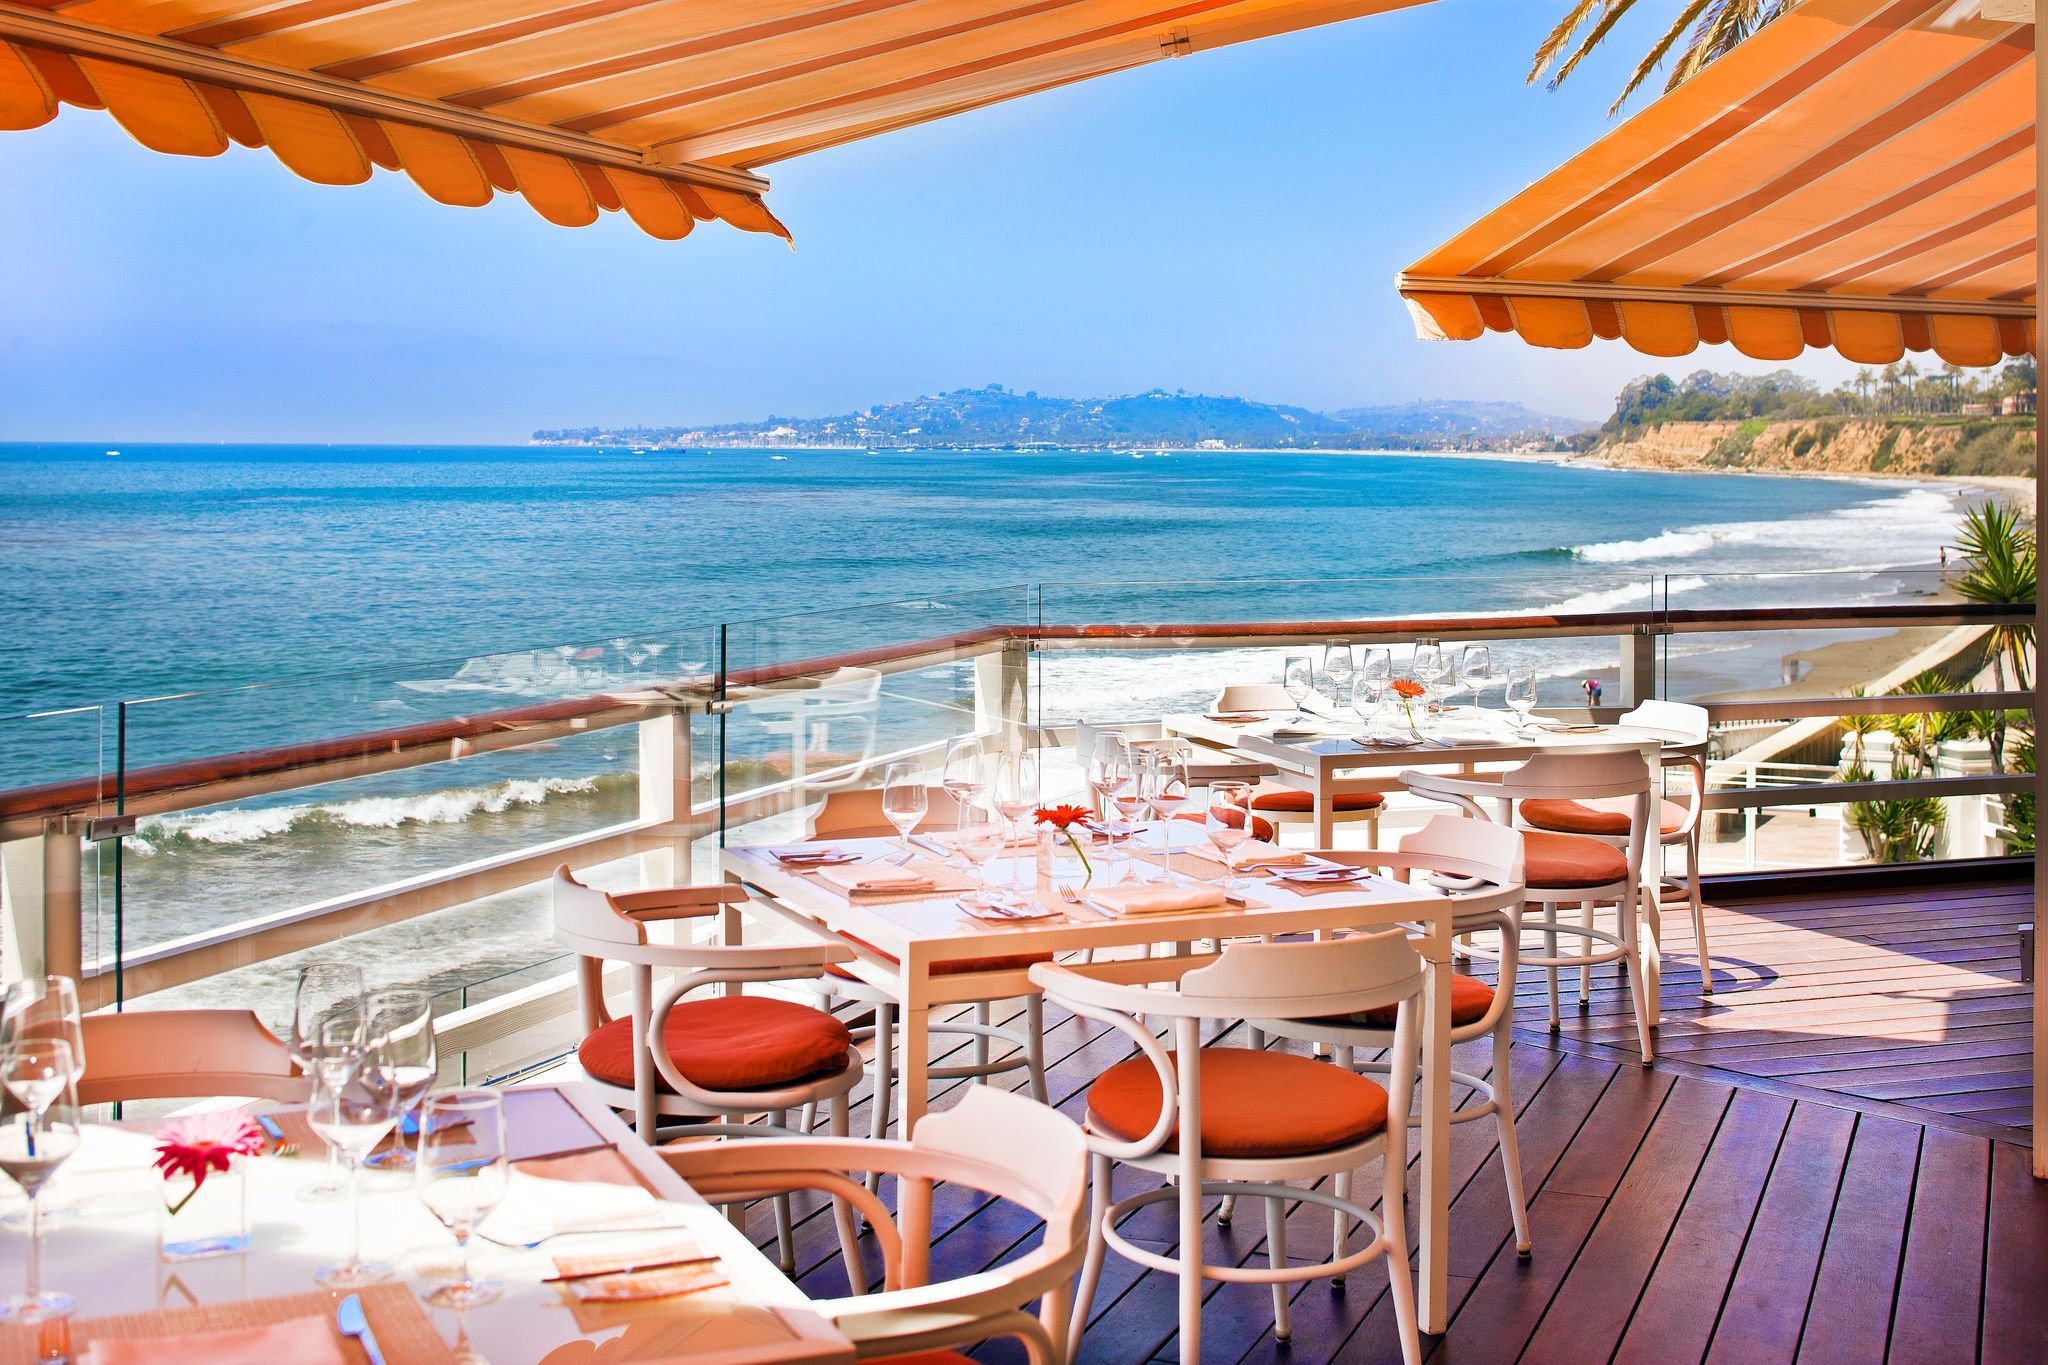 Dining terrace overlooking the Pacific Ocean at the Coral Casino